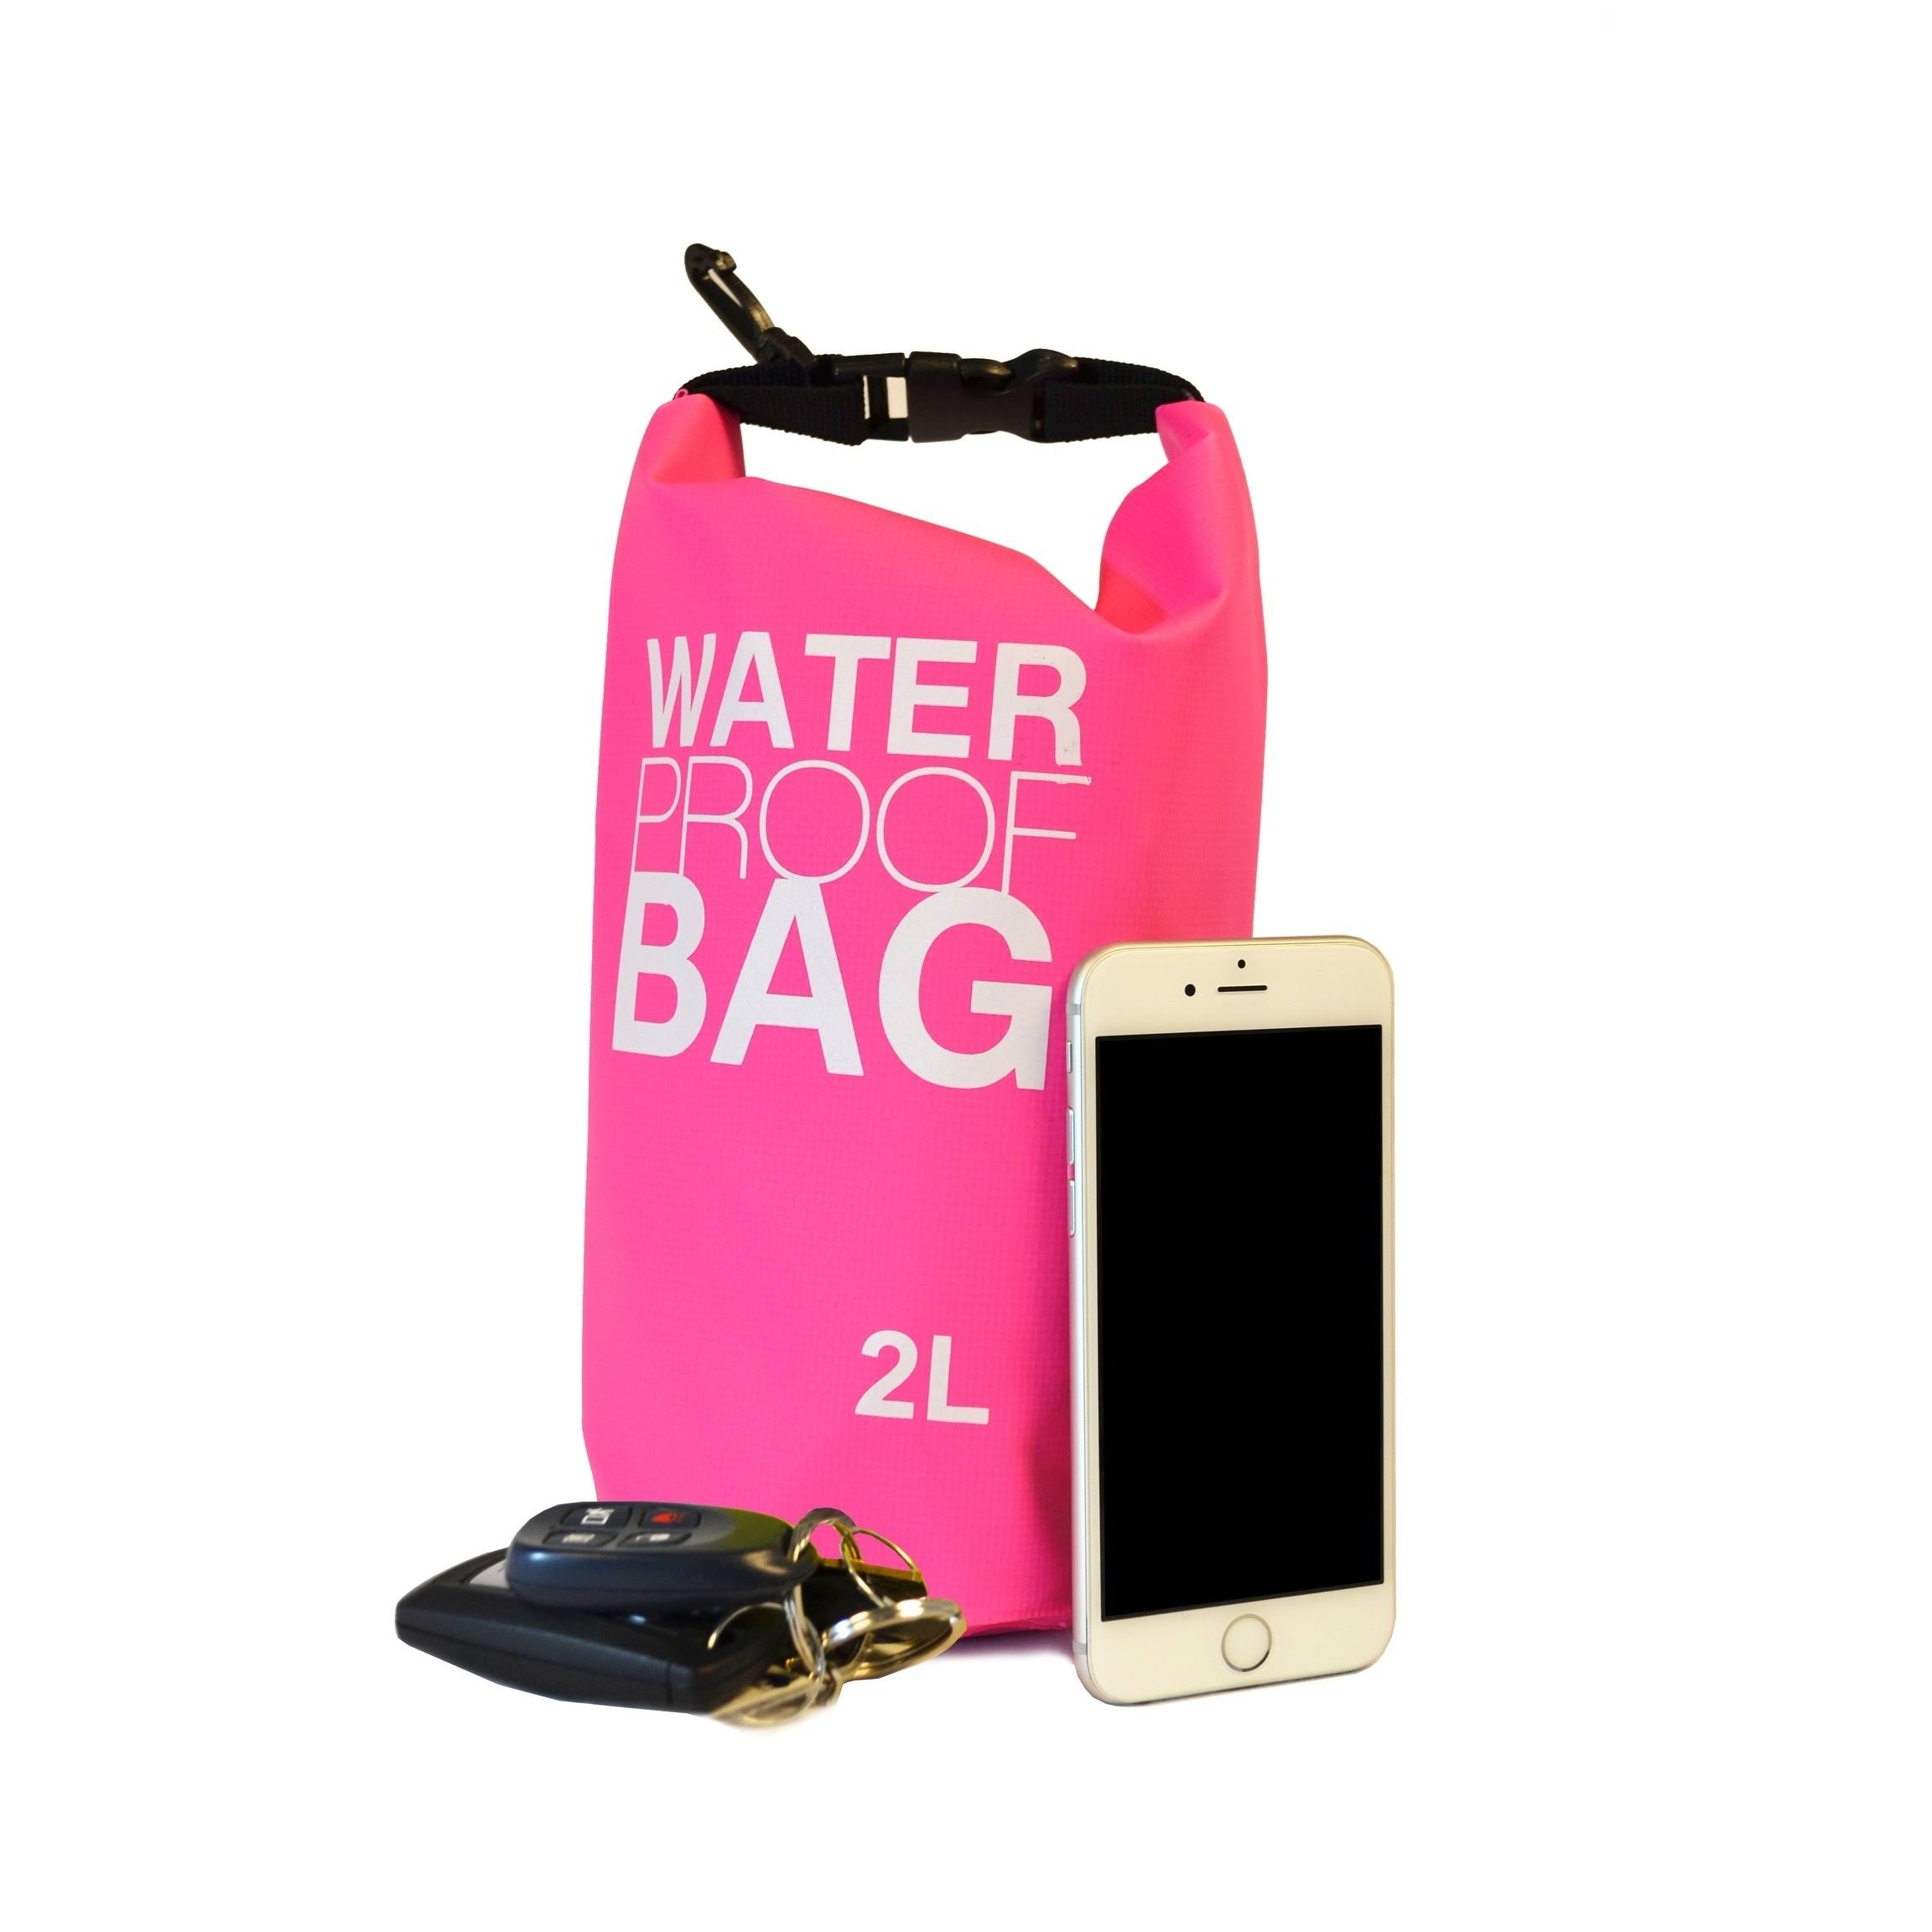 Nupouch Water Proof Bag - Pink, 2l